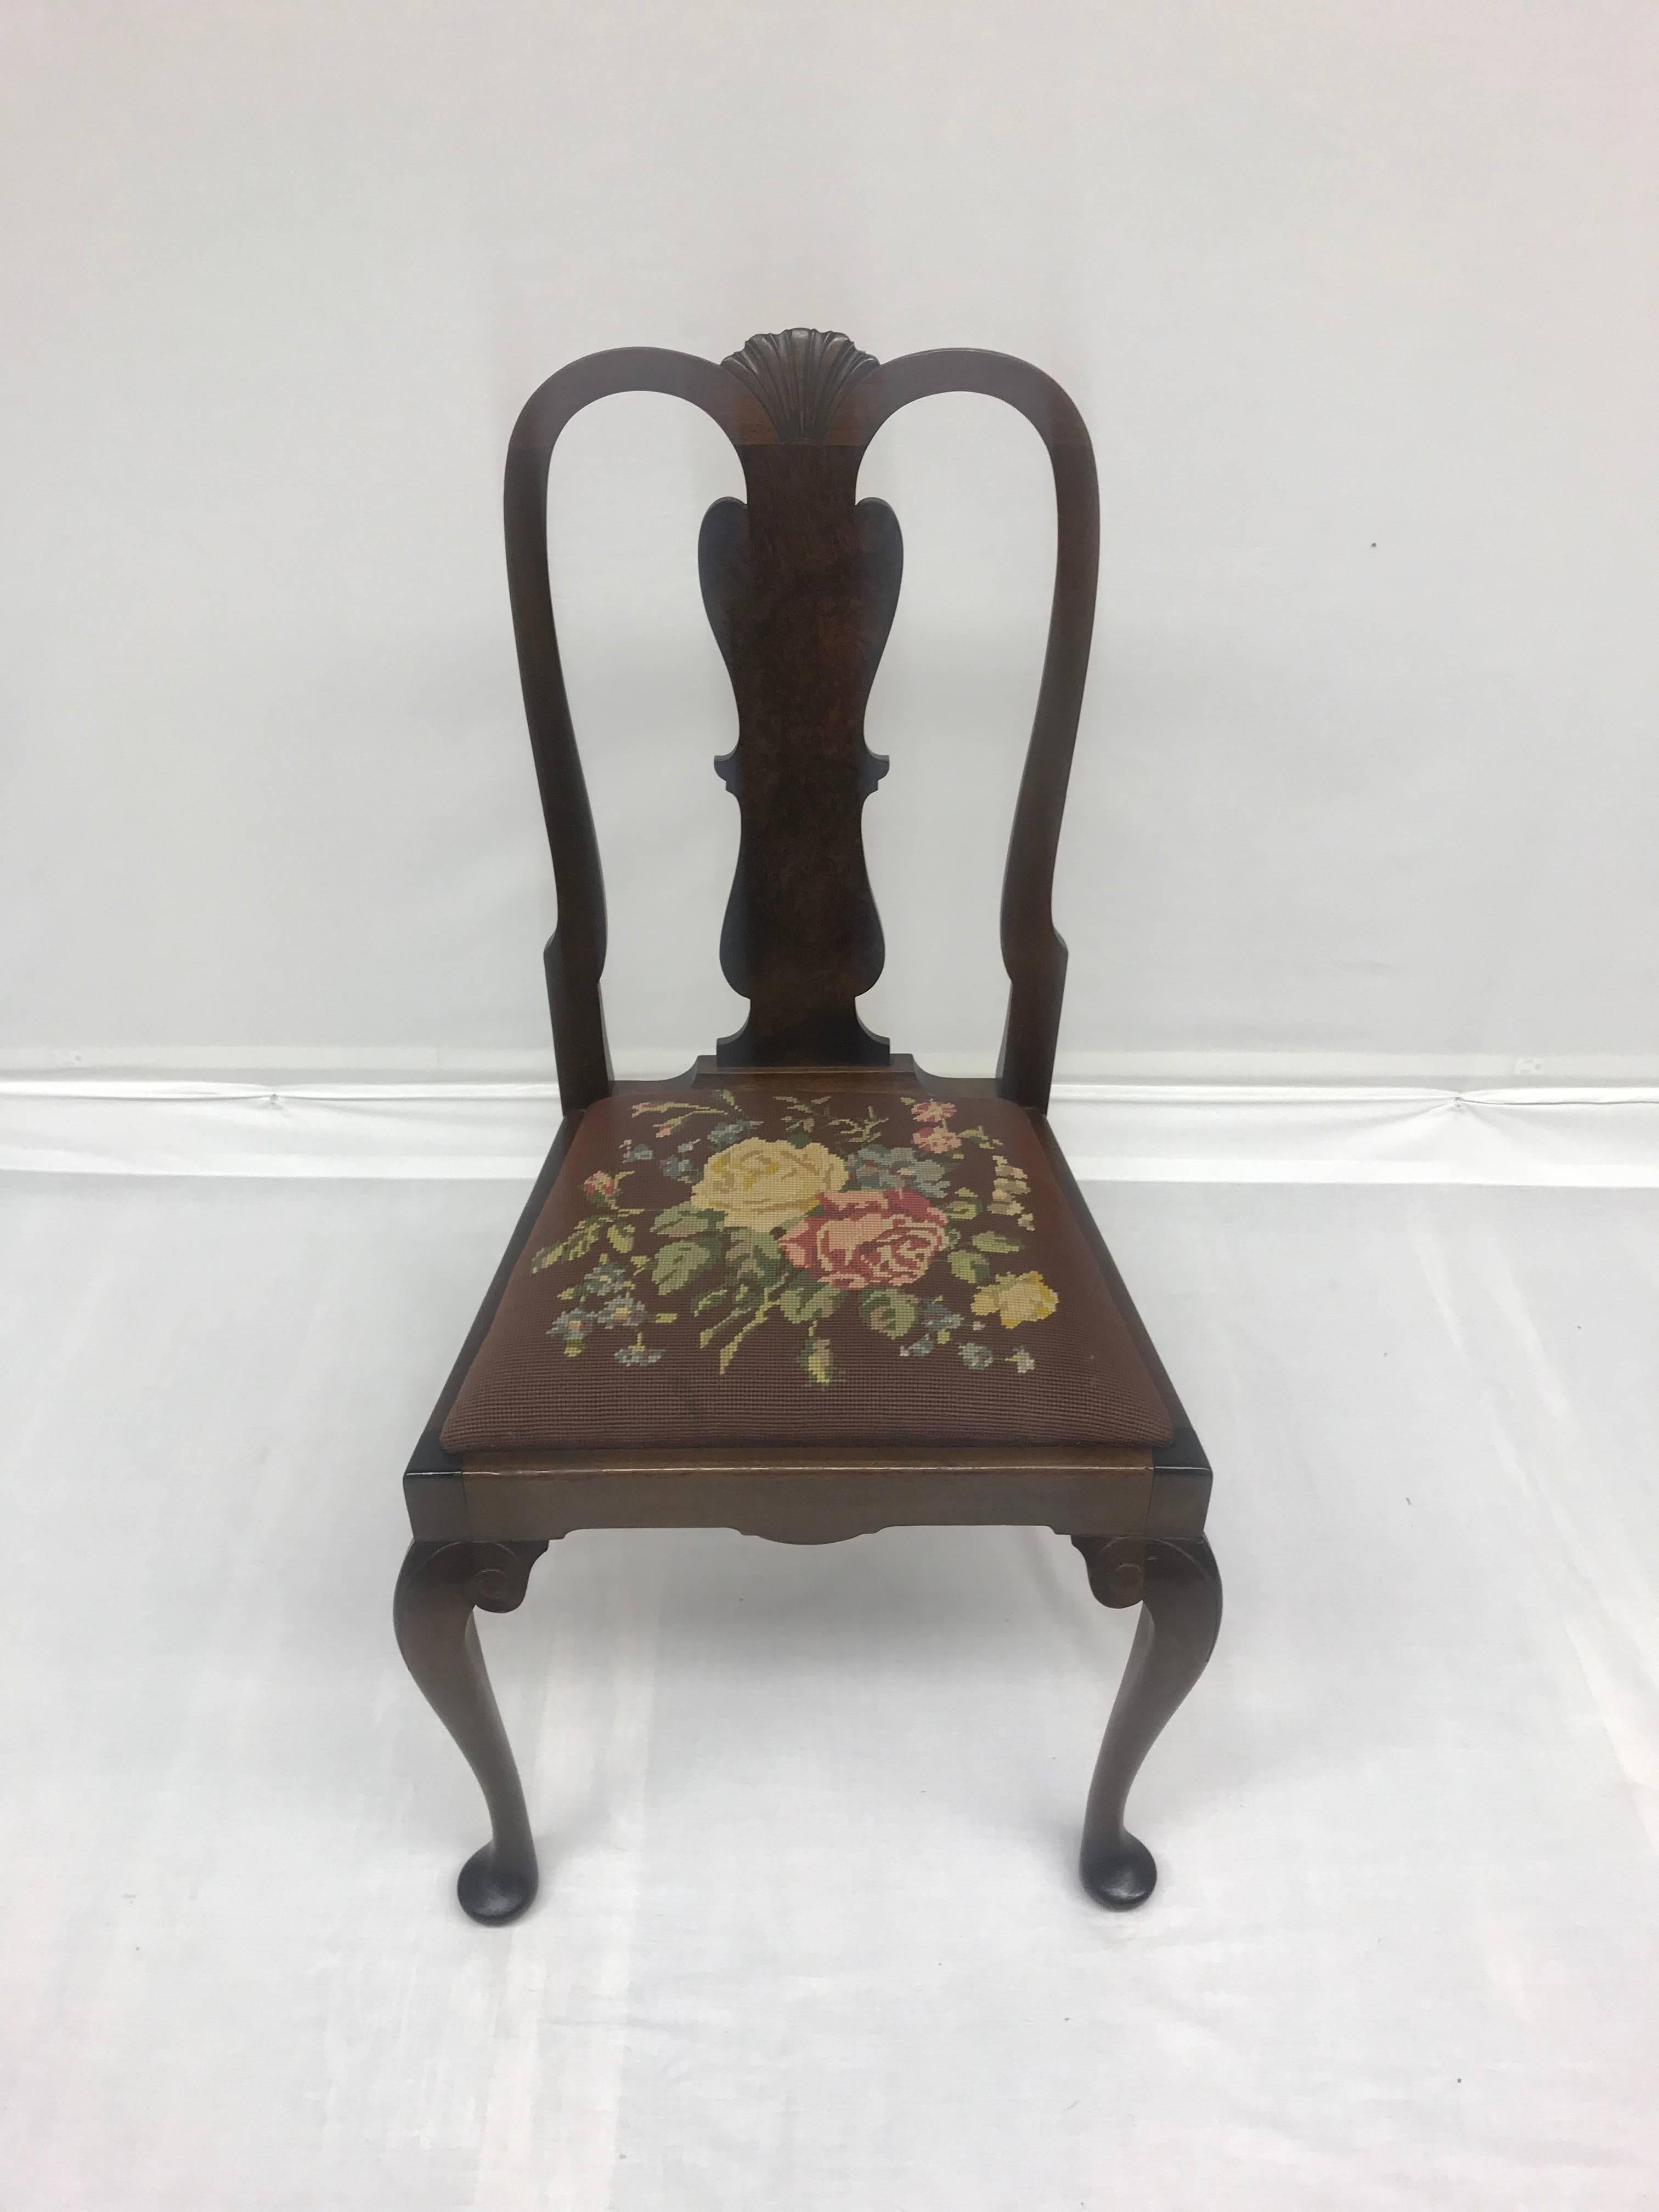 A set of four early 20th century Queen Anne-style dining chairs with seats upholstered in vintage needlepoint floral motifs. Use them around a game table or dining table or as extra seating in a front hall. The chair frames feature a dark mahogany